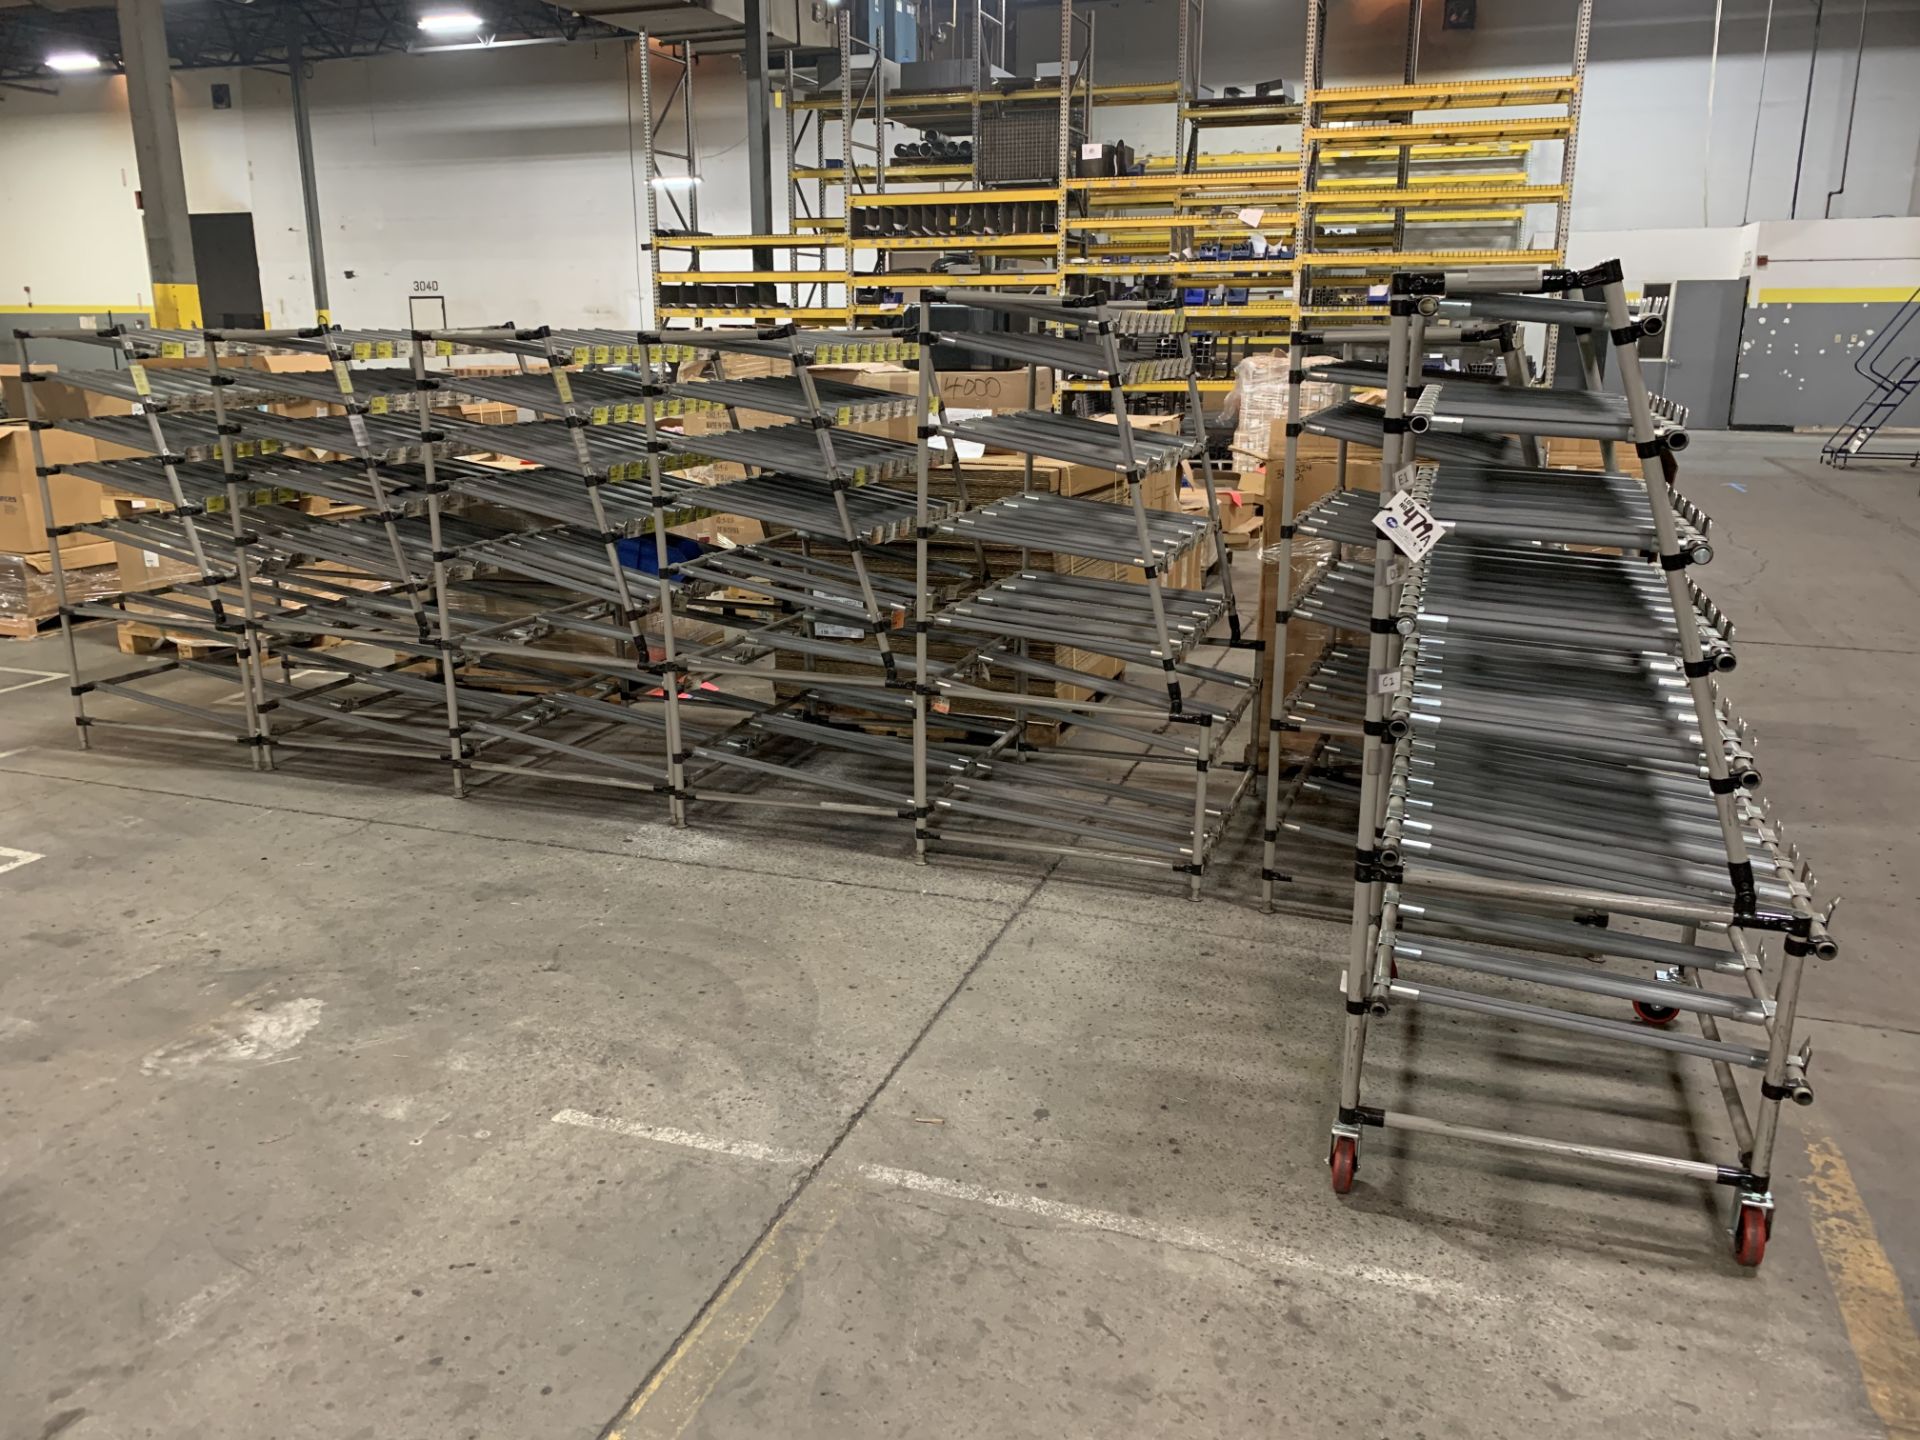 7 Shelving Units - 6 stationary, 1 on casters